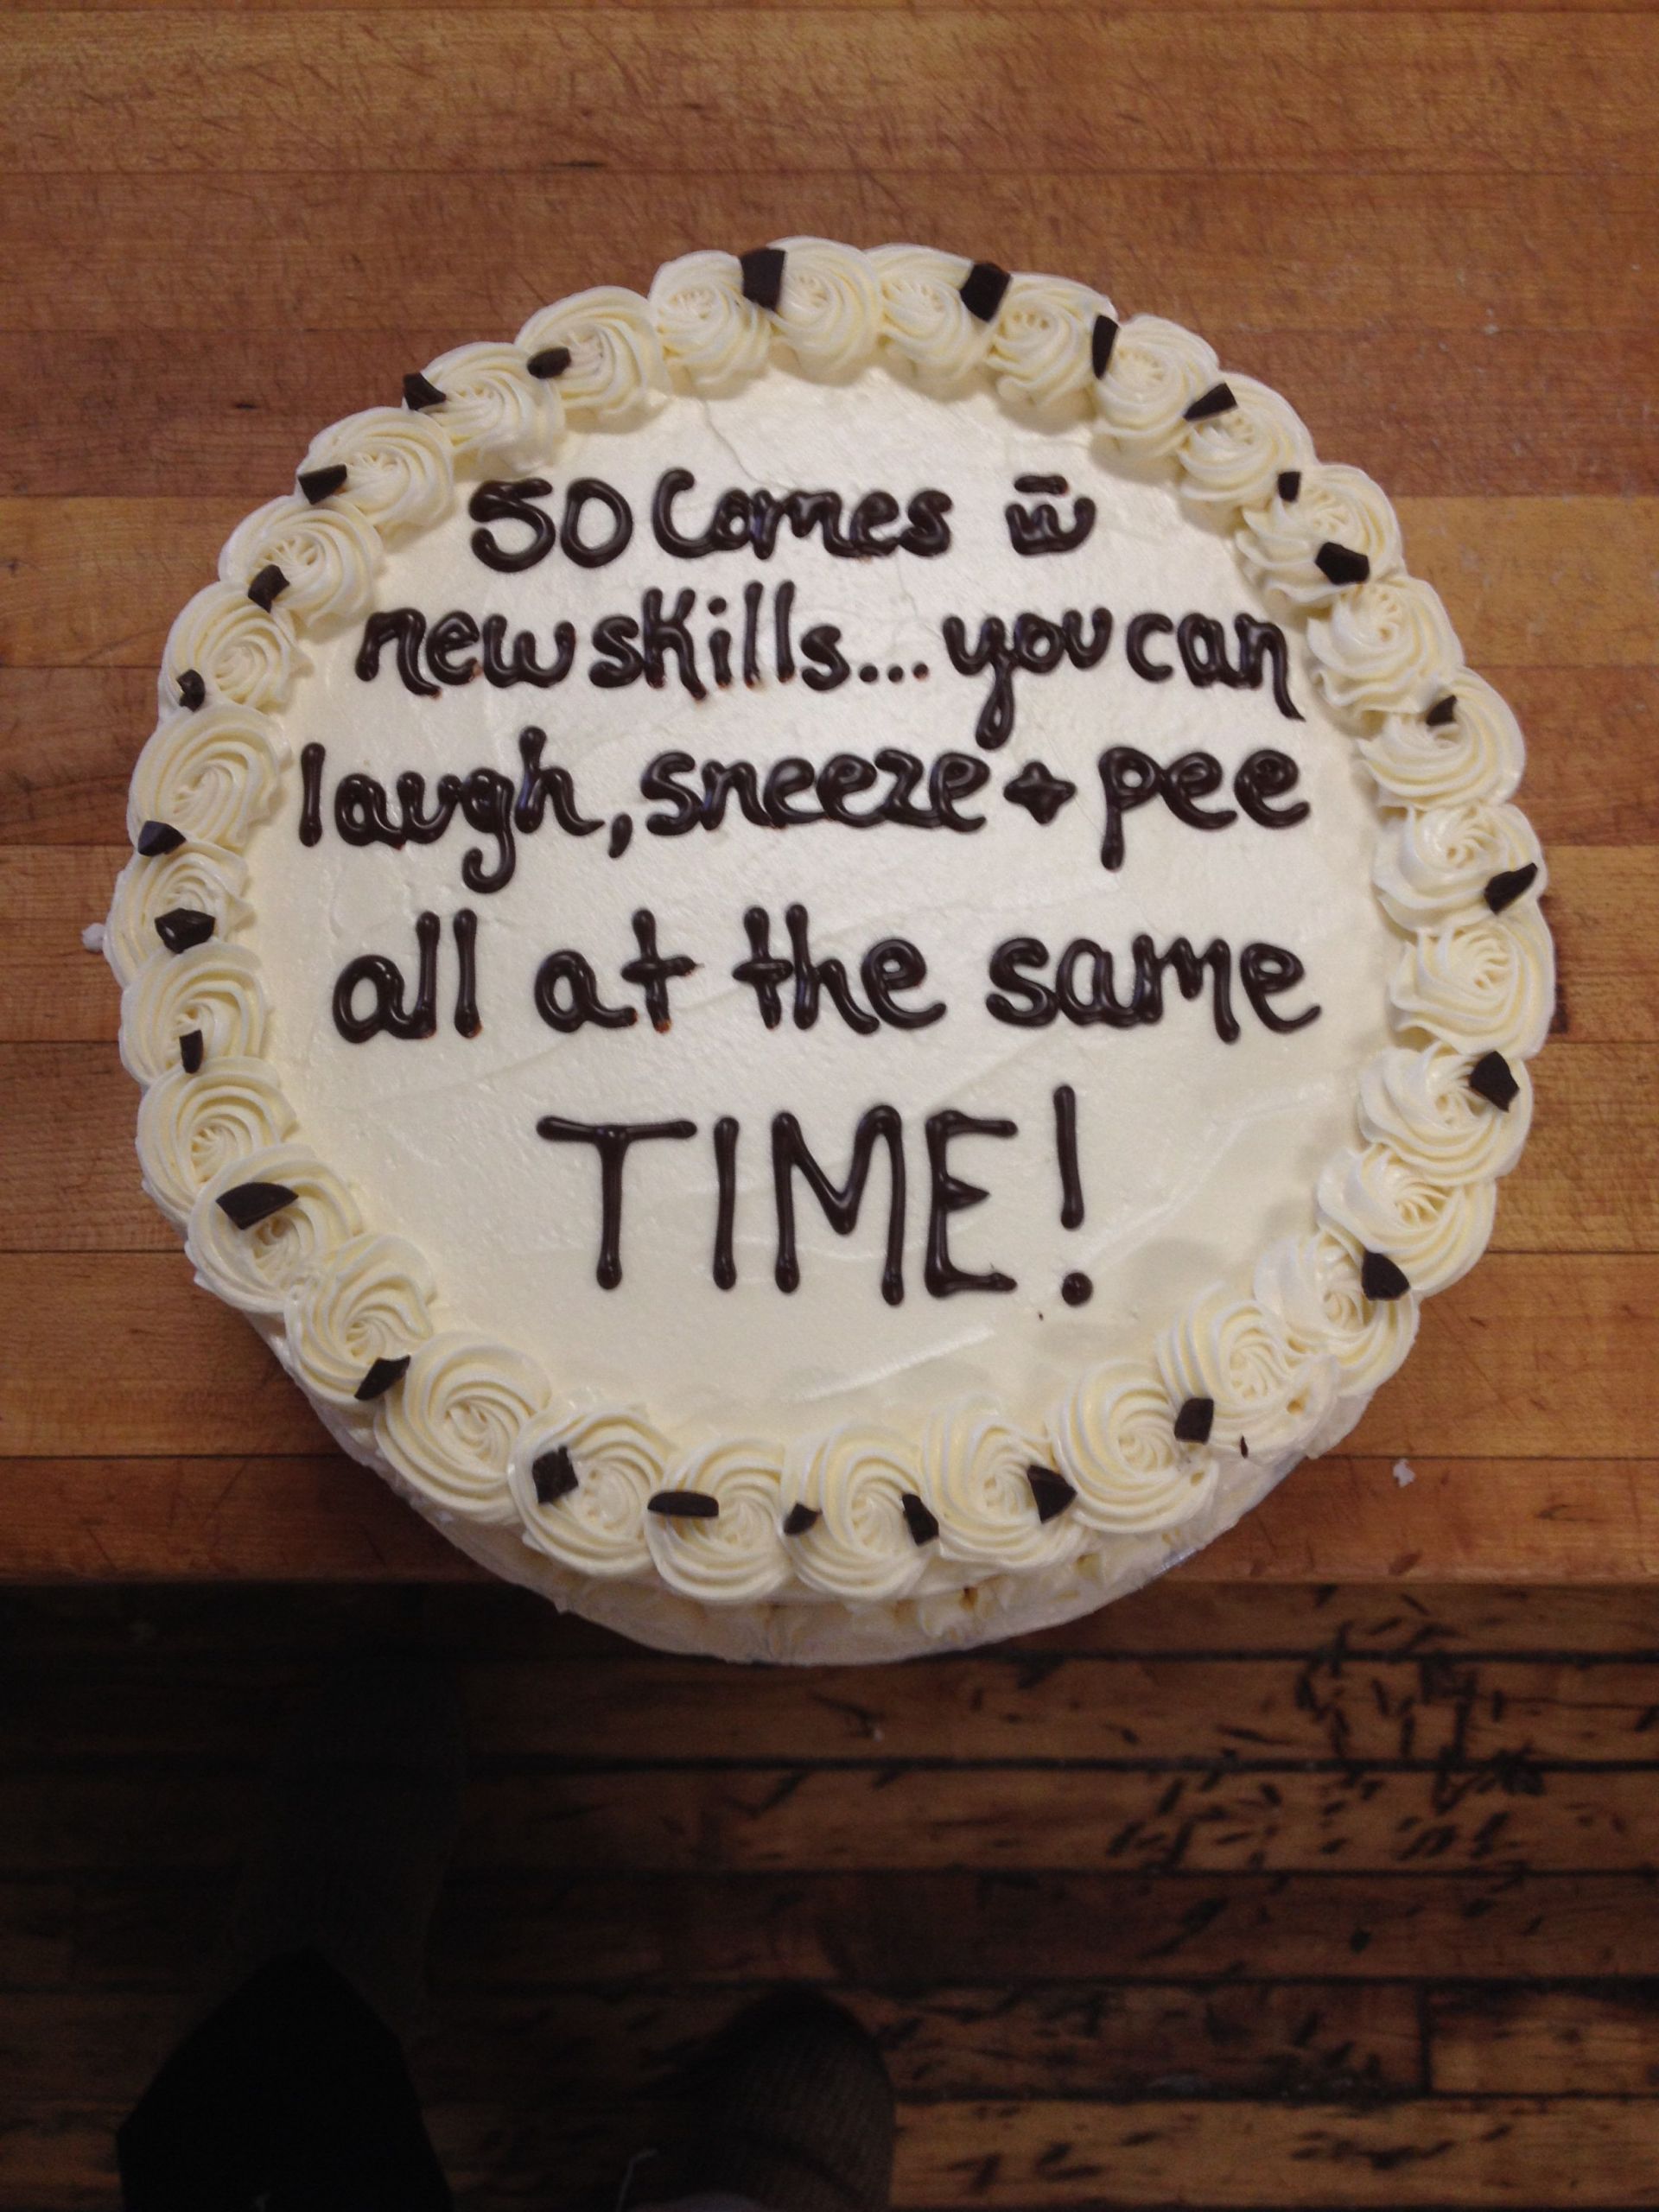 Funny Birthday Cake Sayings
 Funny cake sayings about turning 50